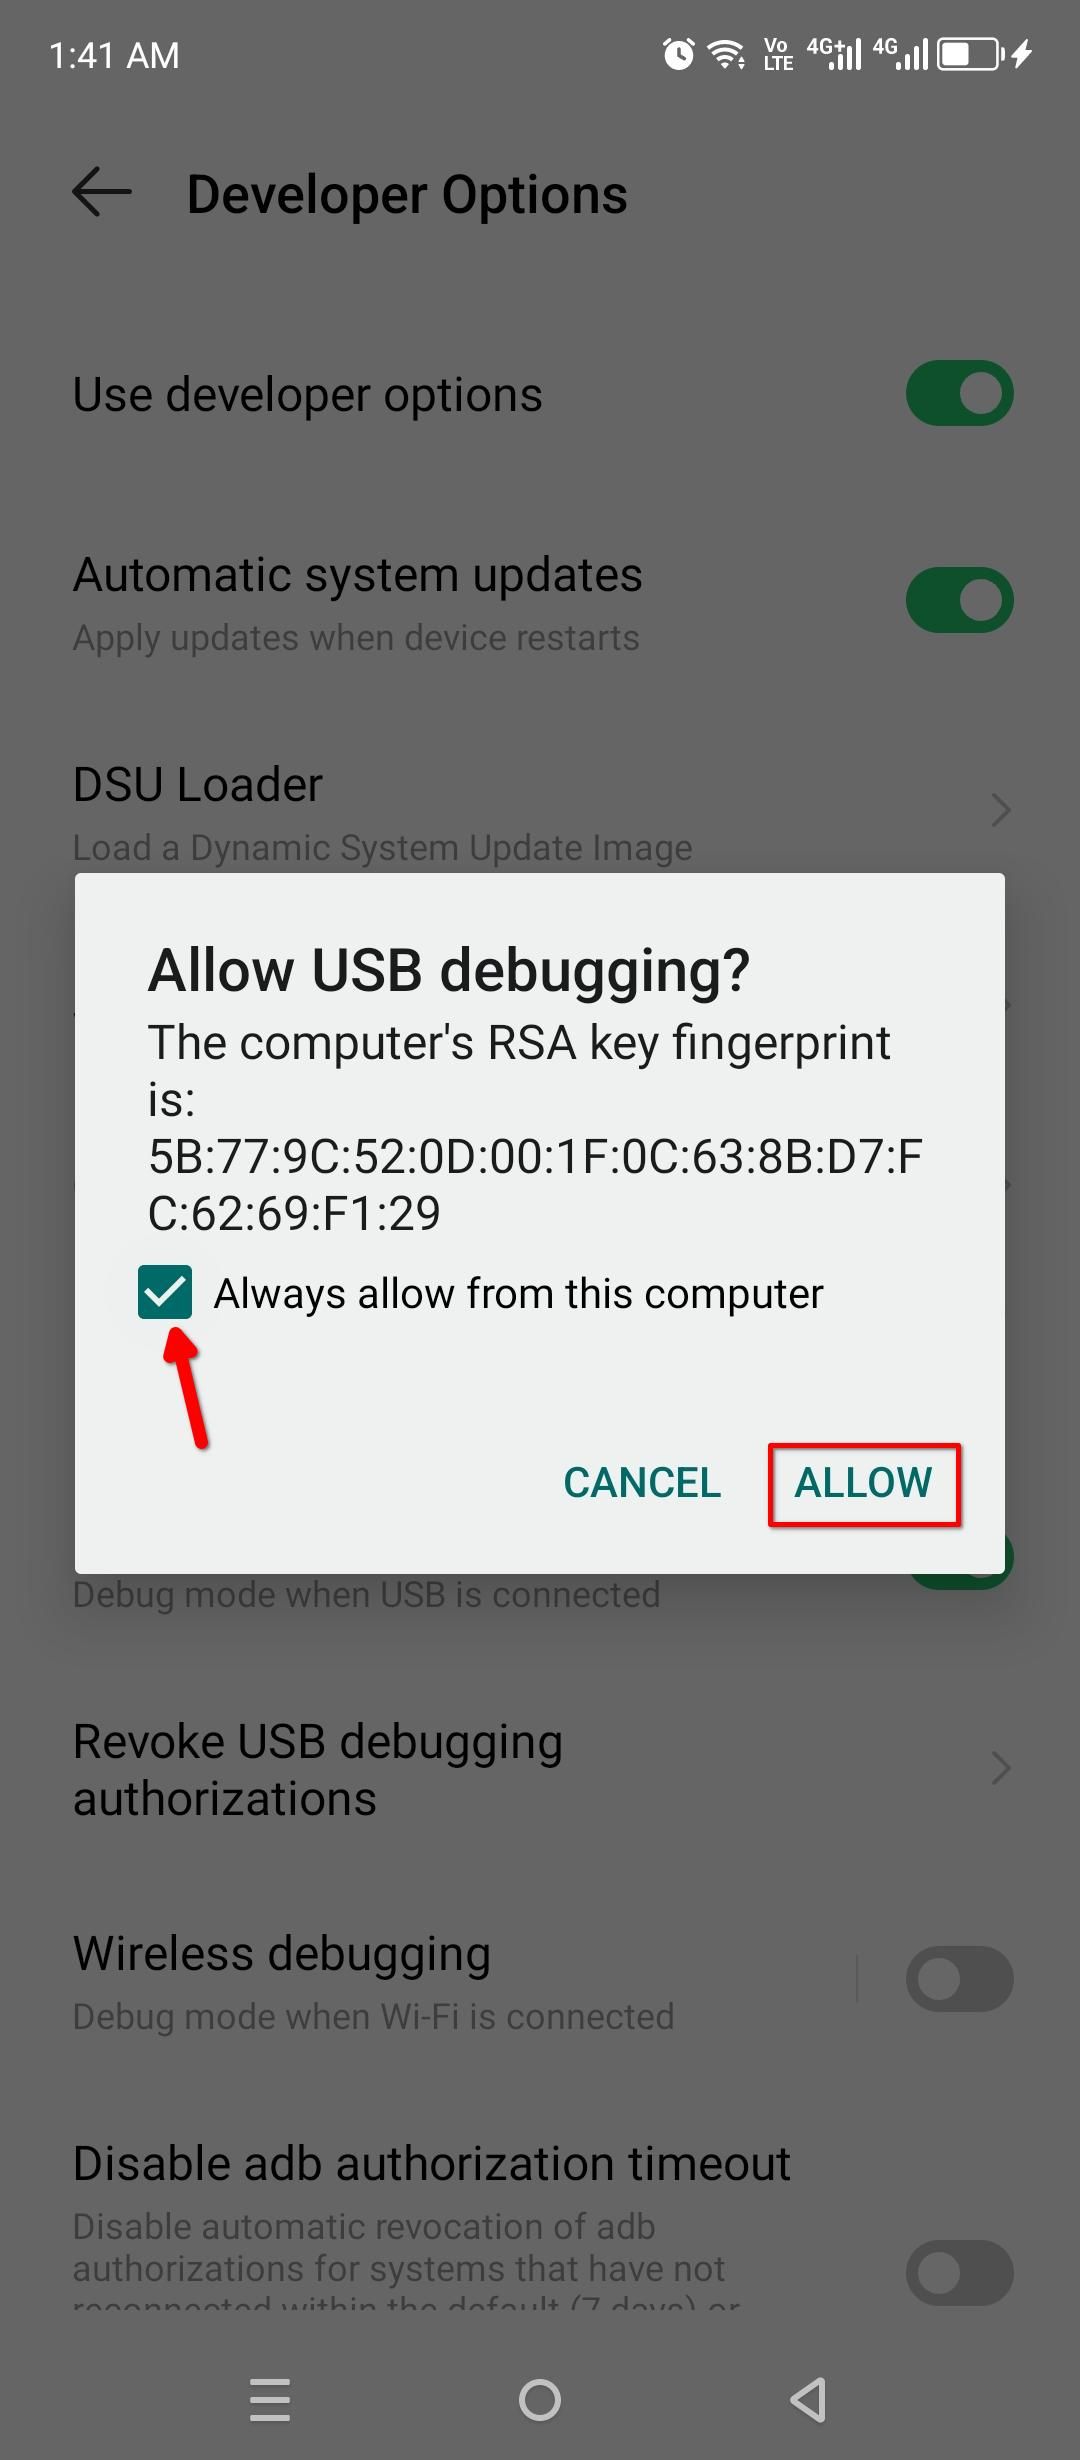 Allowing USB debugging for a computer.